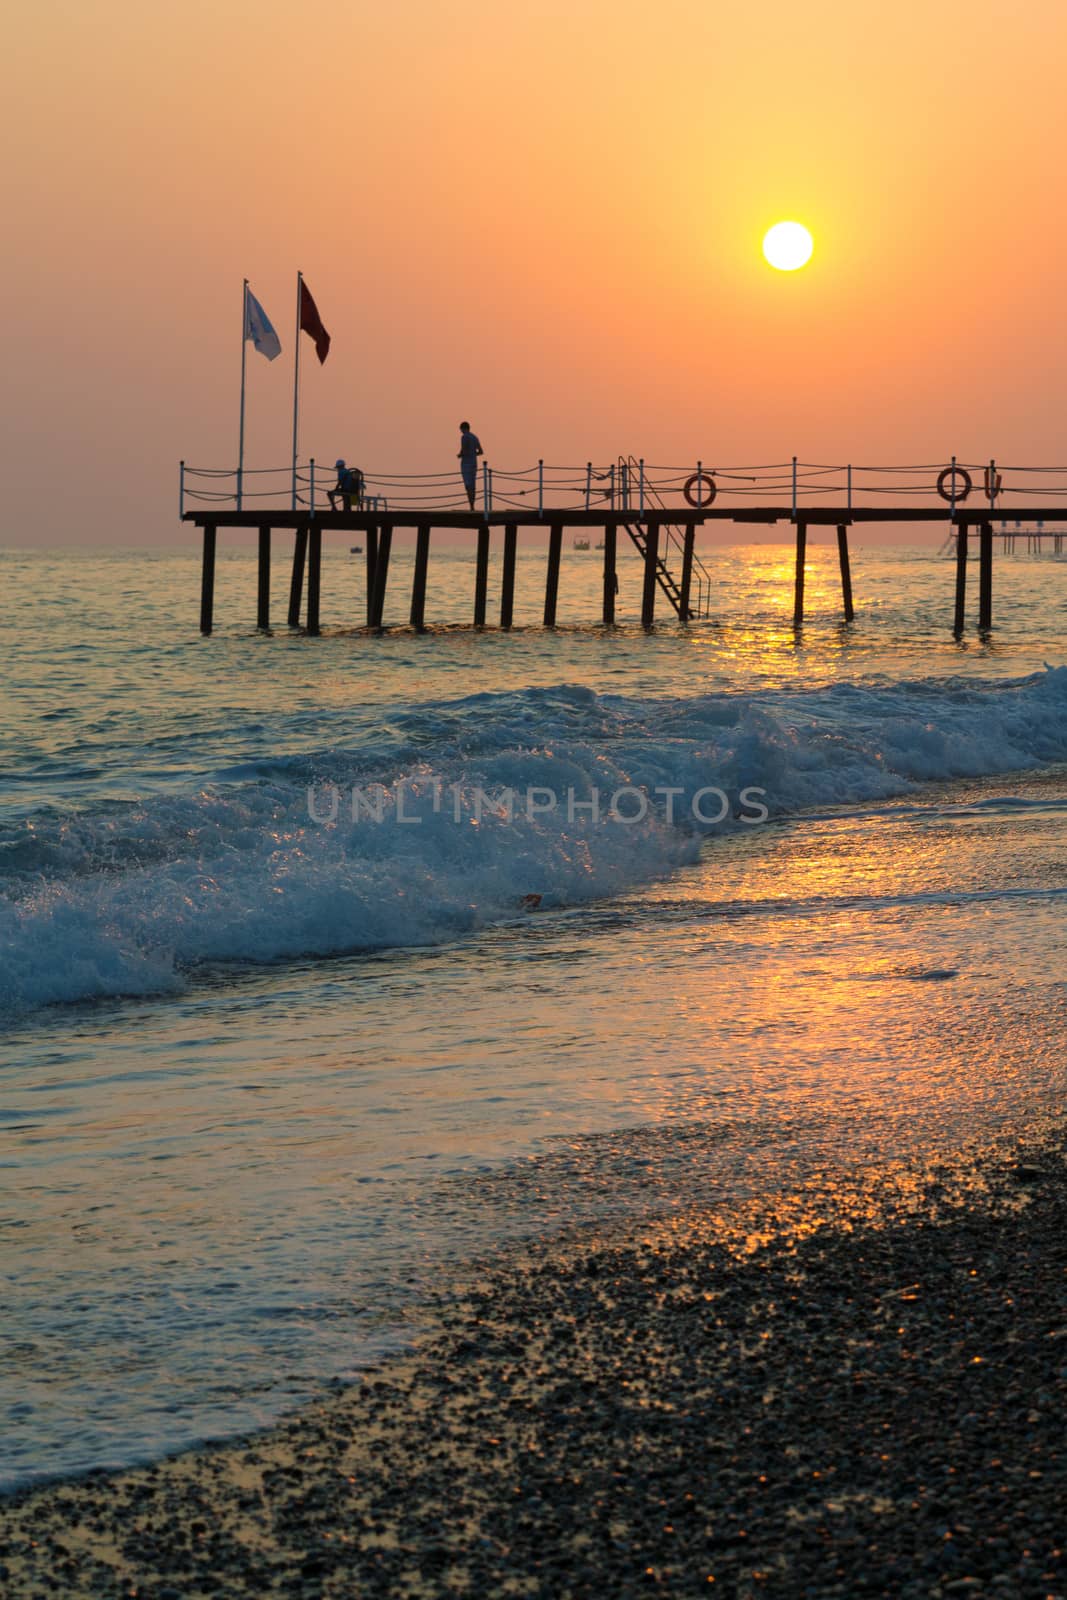 Sunset on the sea with a view of the pier